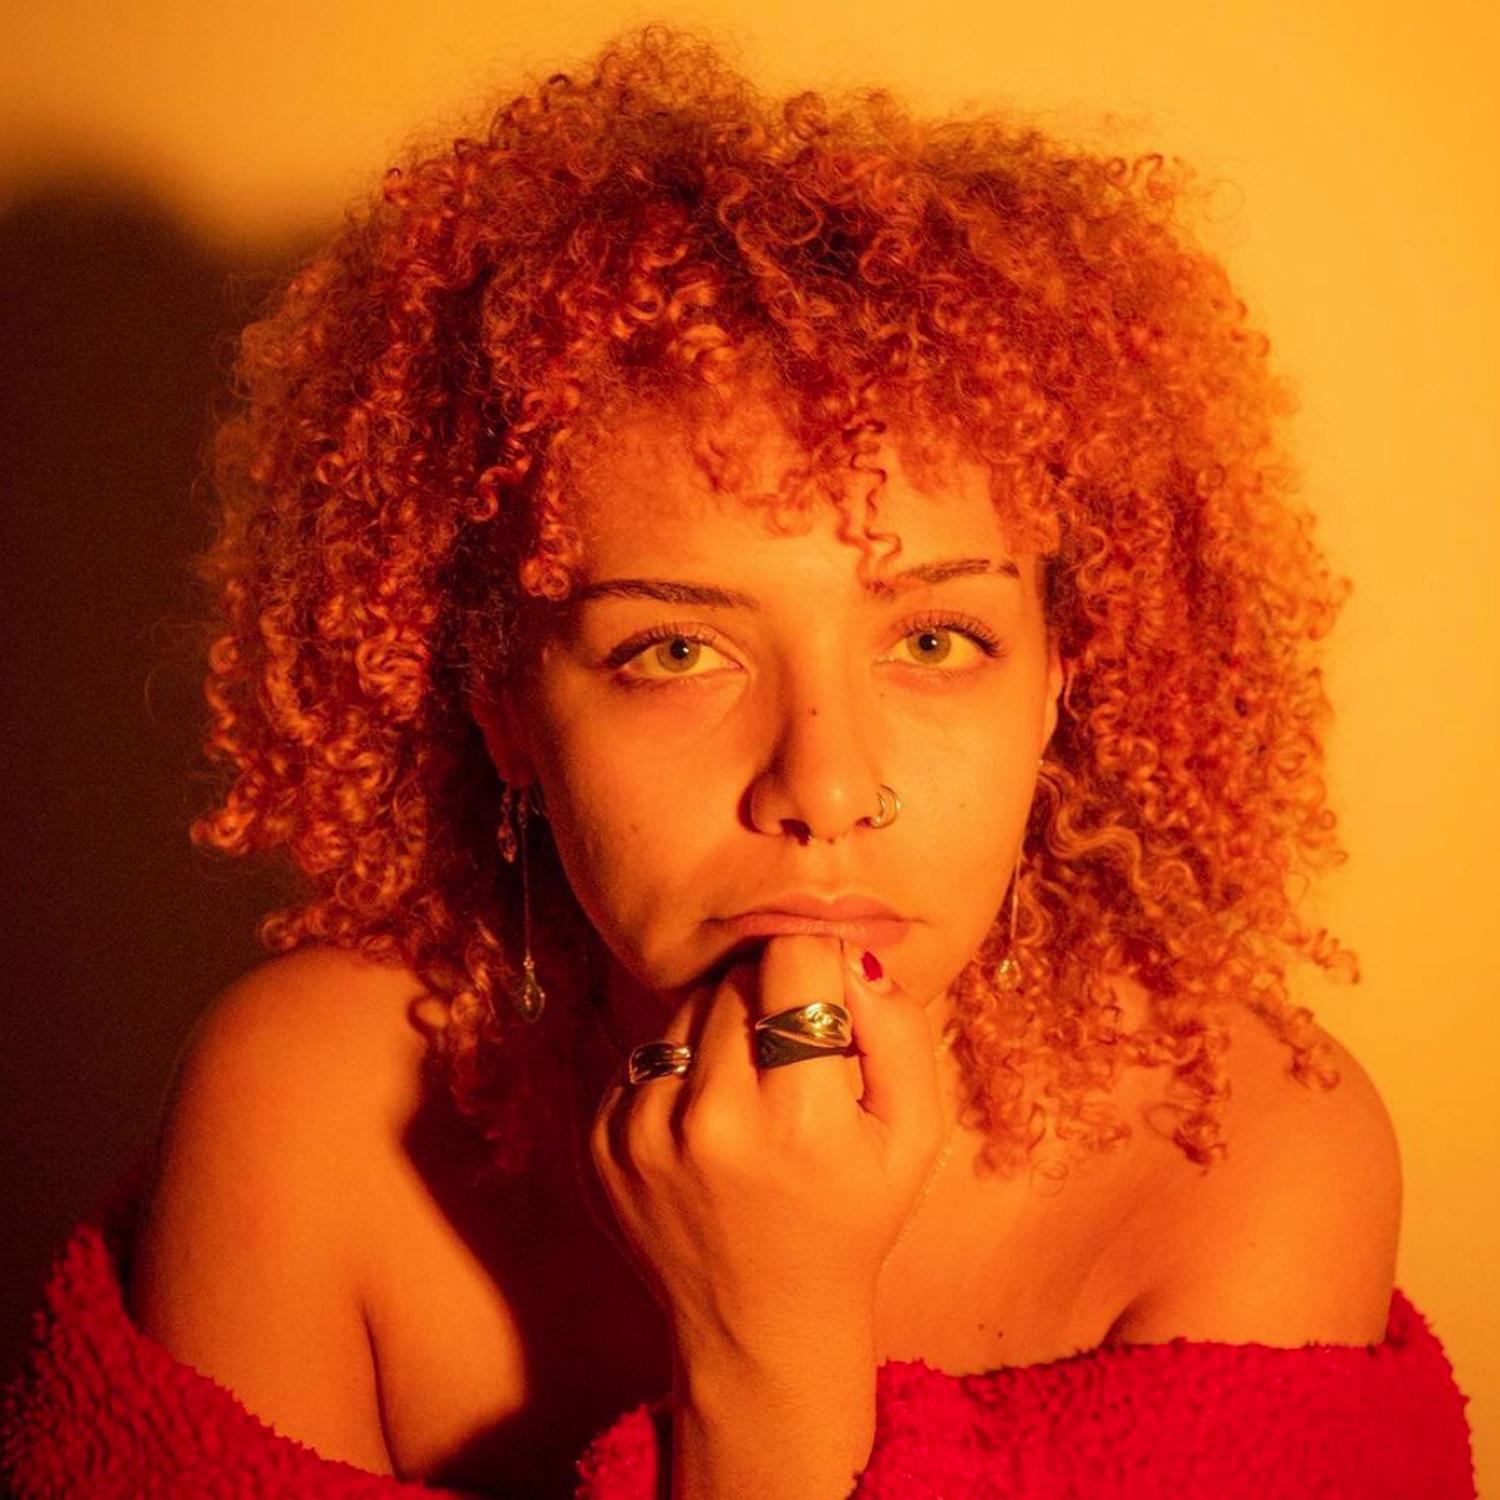 Against a yellow background, a person rests their chin on their fist while looking directly into the camera; they have curly hair, brown skin and are wearing an off the shoulder fleece